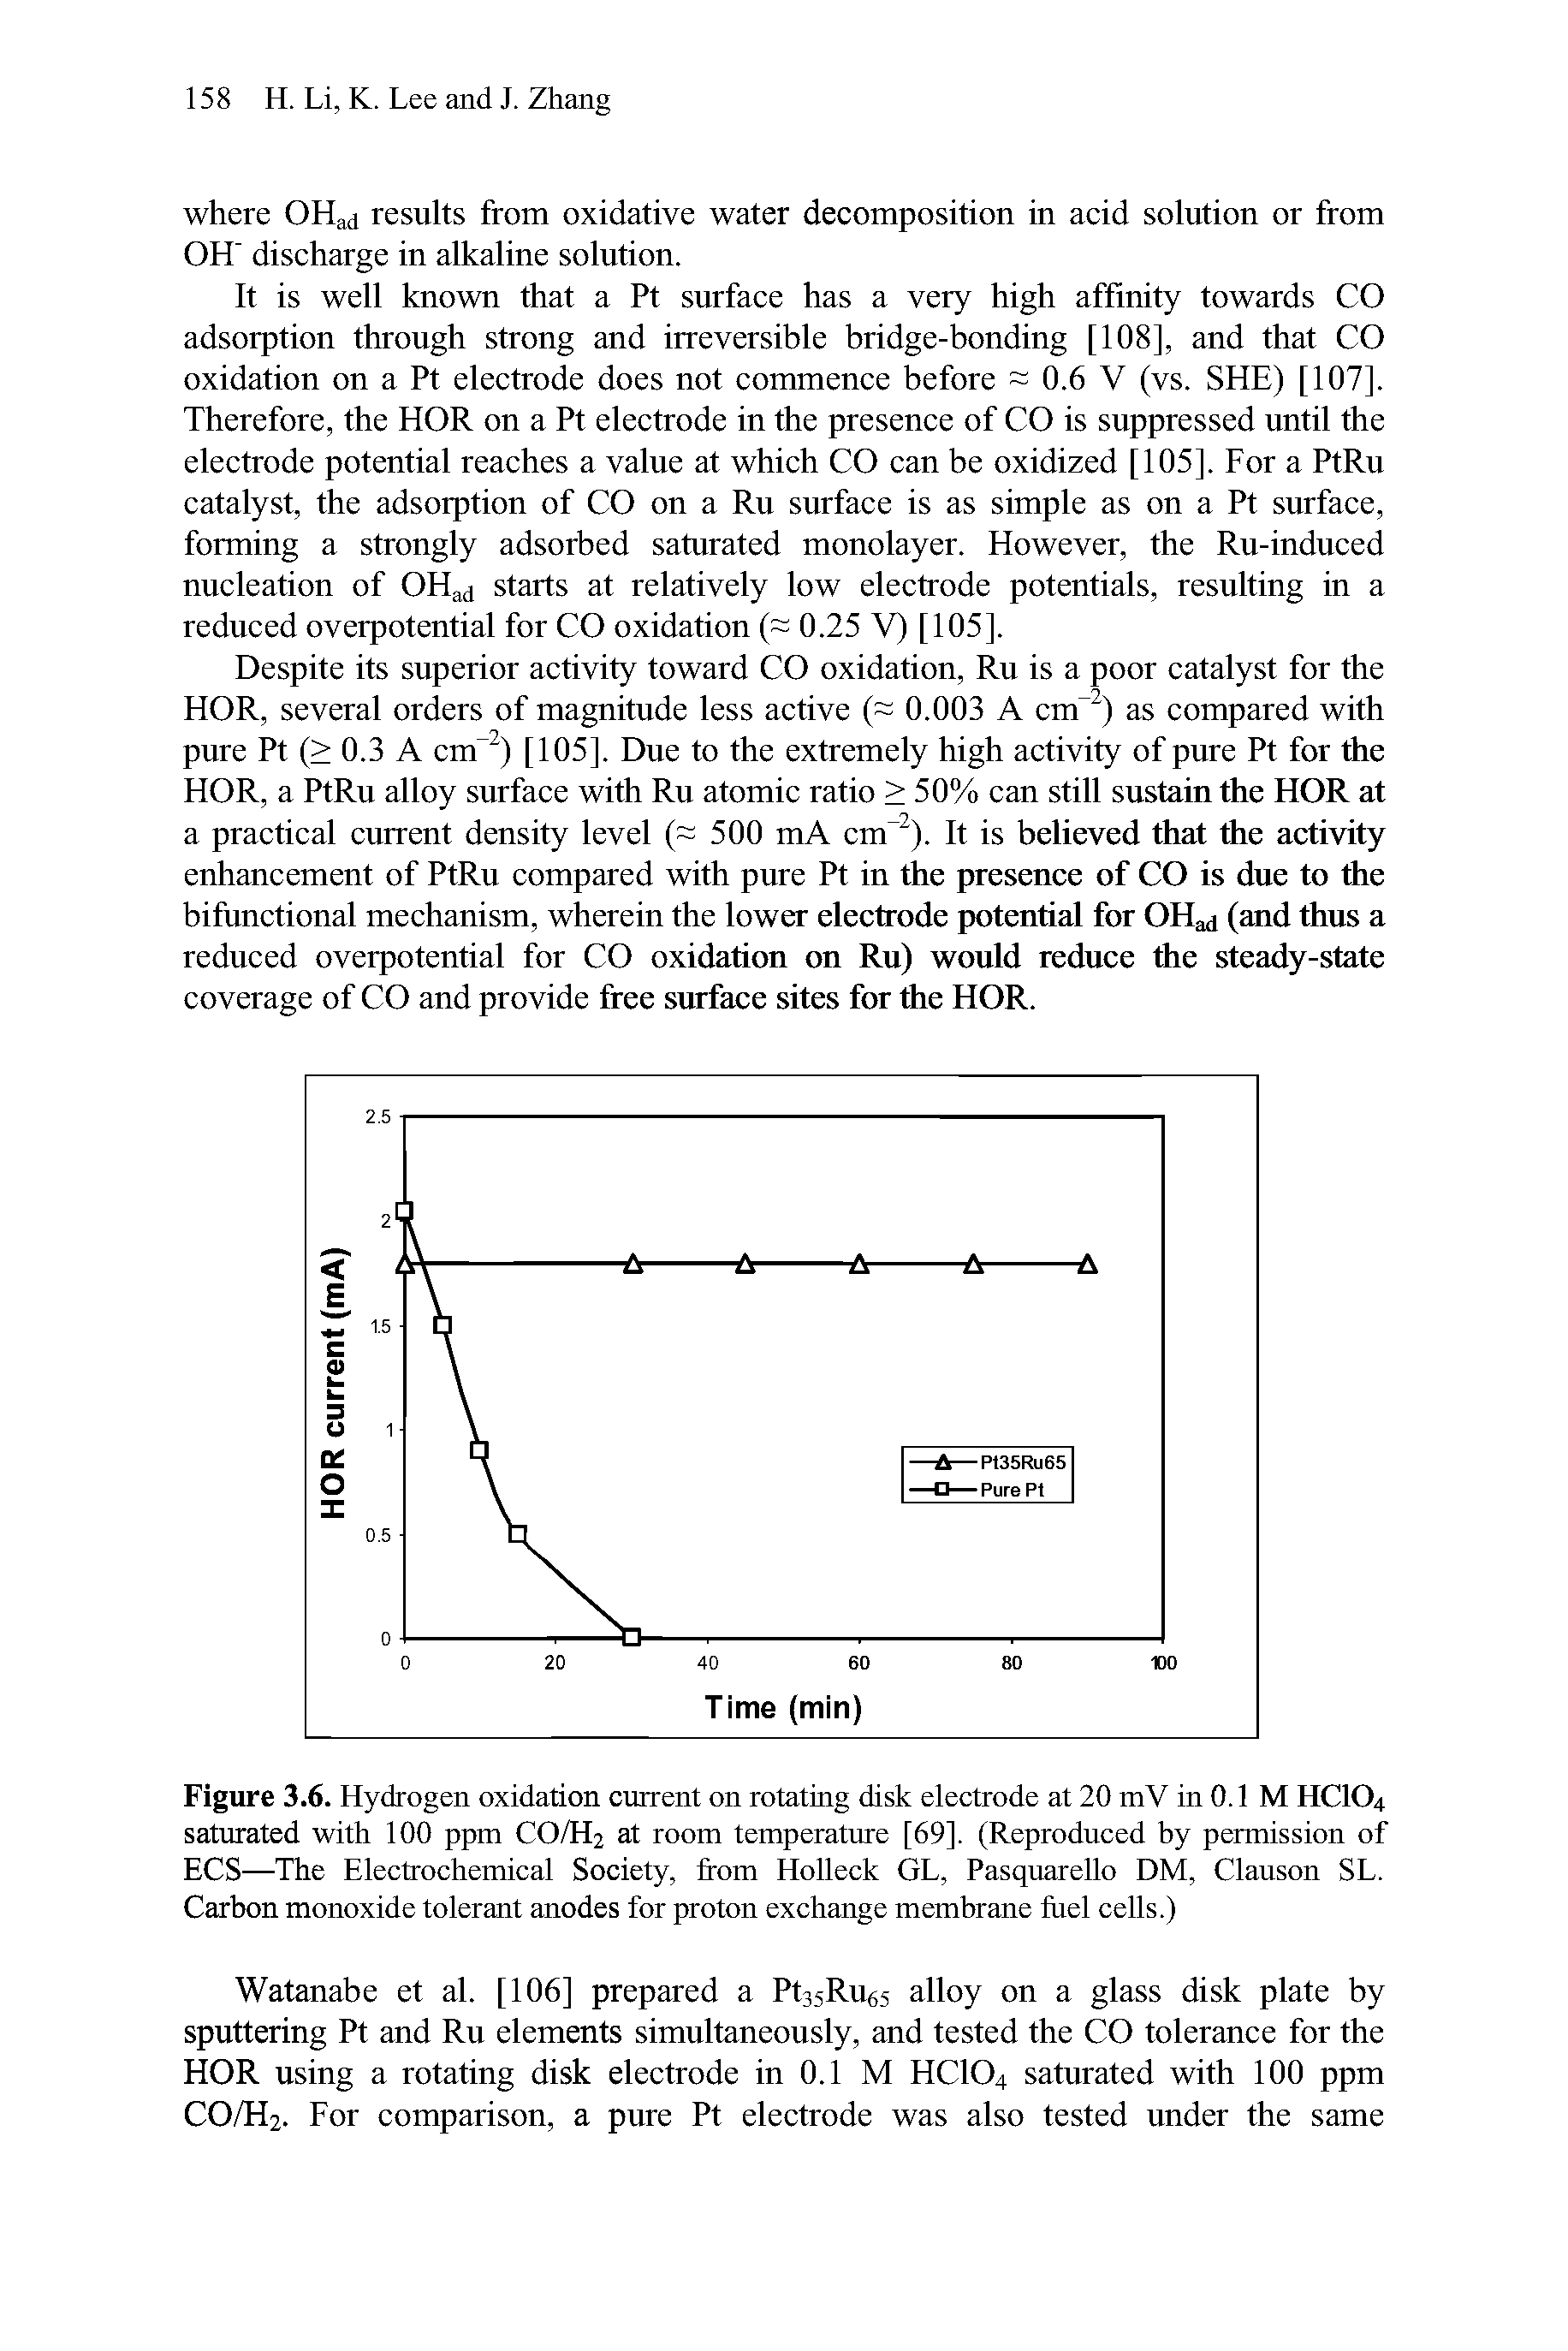 Figure 3.6. Hydrogen oxidation current on rotating disk electrode at 20 mV in 0.1 M HCIO4 saturated with 100 ppm CO/H2 at room temperature [69]. (Reproduced by permission of ECS—The Electrochemical Society, from Holleck GL, Pasquarello DM, Clanson SL. Carbon monoxide tolerant anodes for proton exchange membrane fuel cells.)...